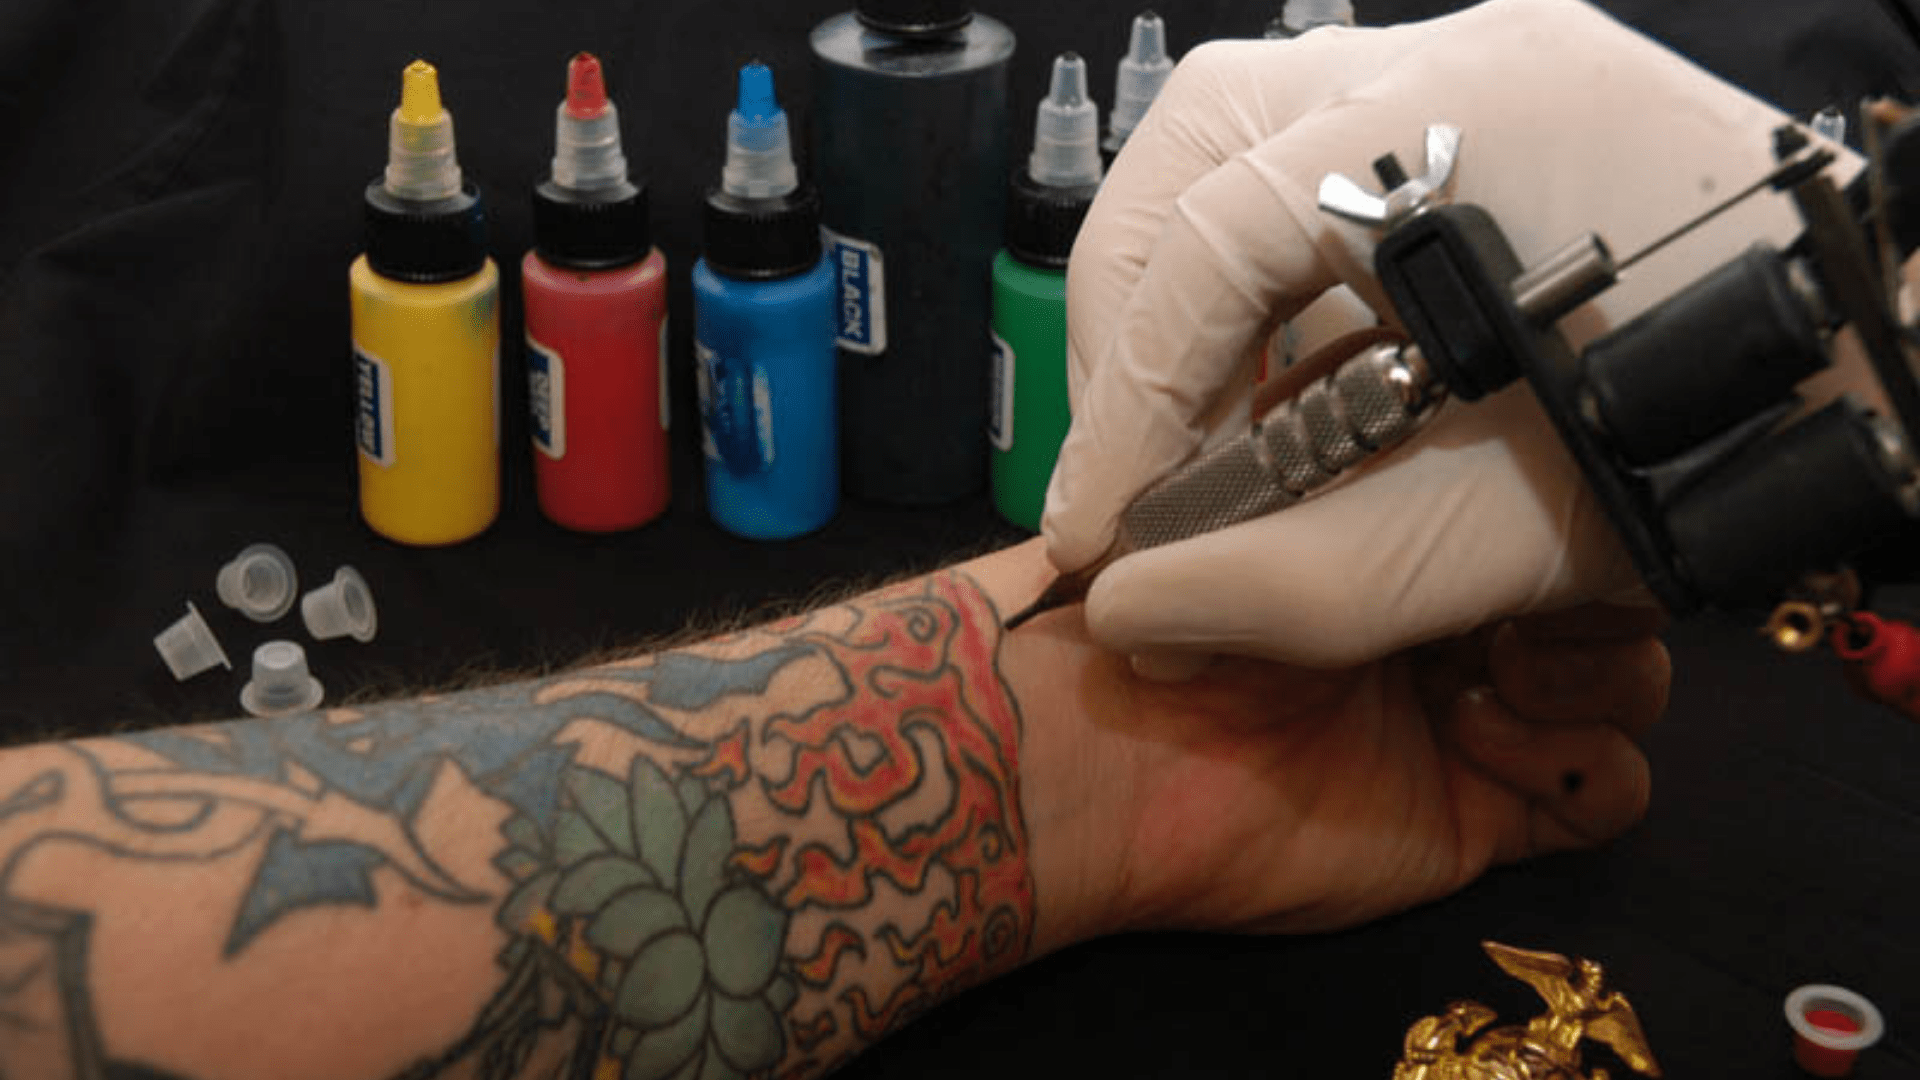 6 tips to get you ready for your next tattoo